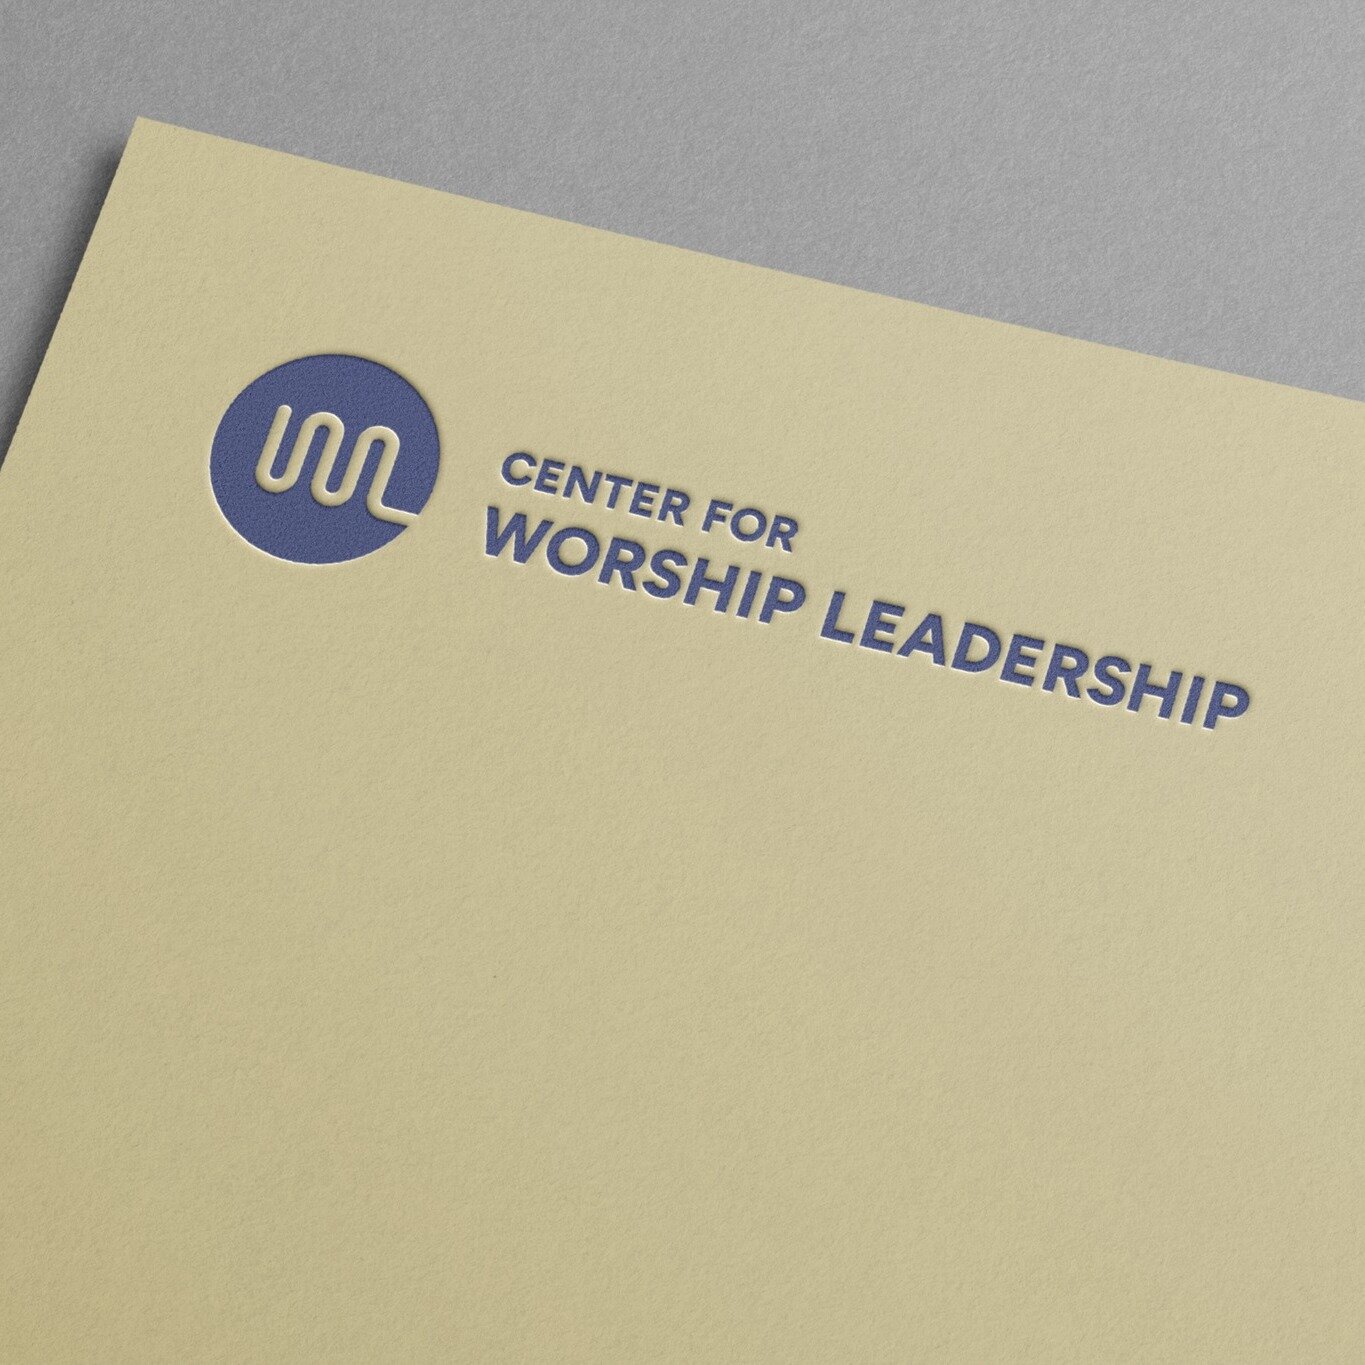 The Center for Worship Leadership (CWL) is an exceptional education center focusing on worship music programs at Concordia University Irvine. We had the honor this year to design their new logo and branding system. For the main logo, we combined the 